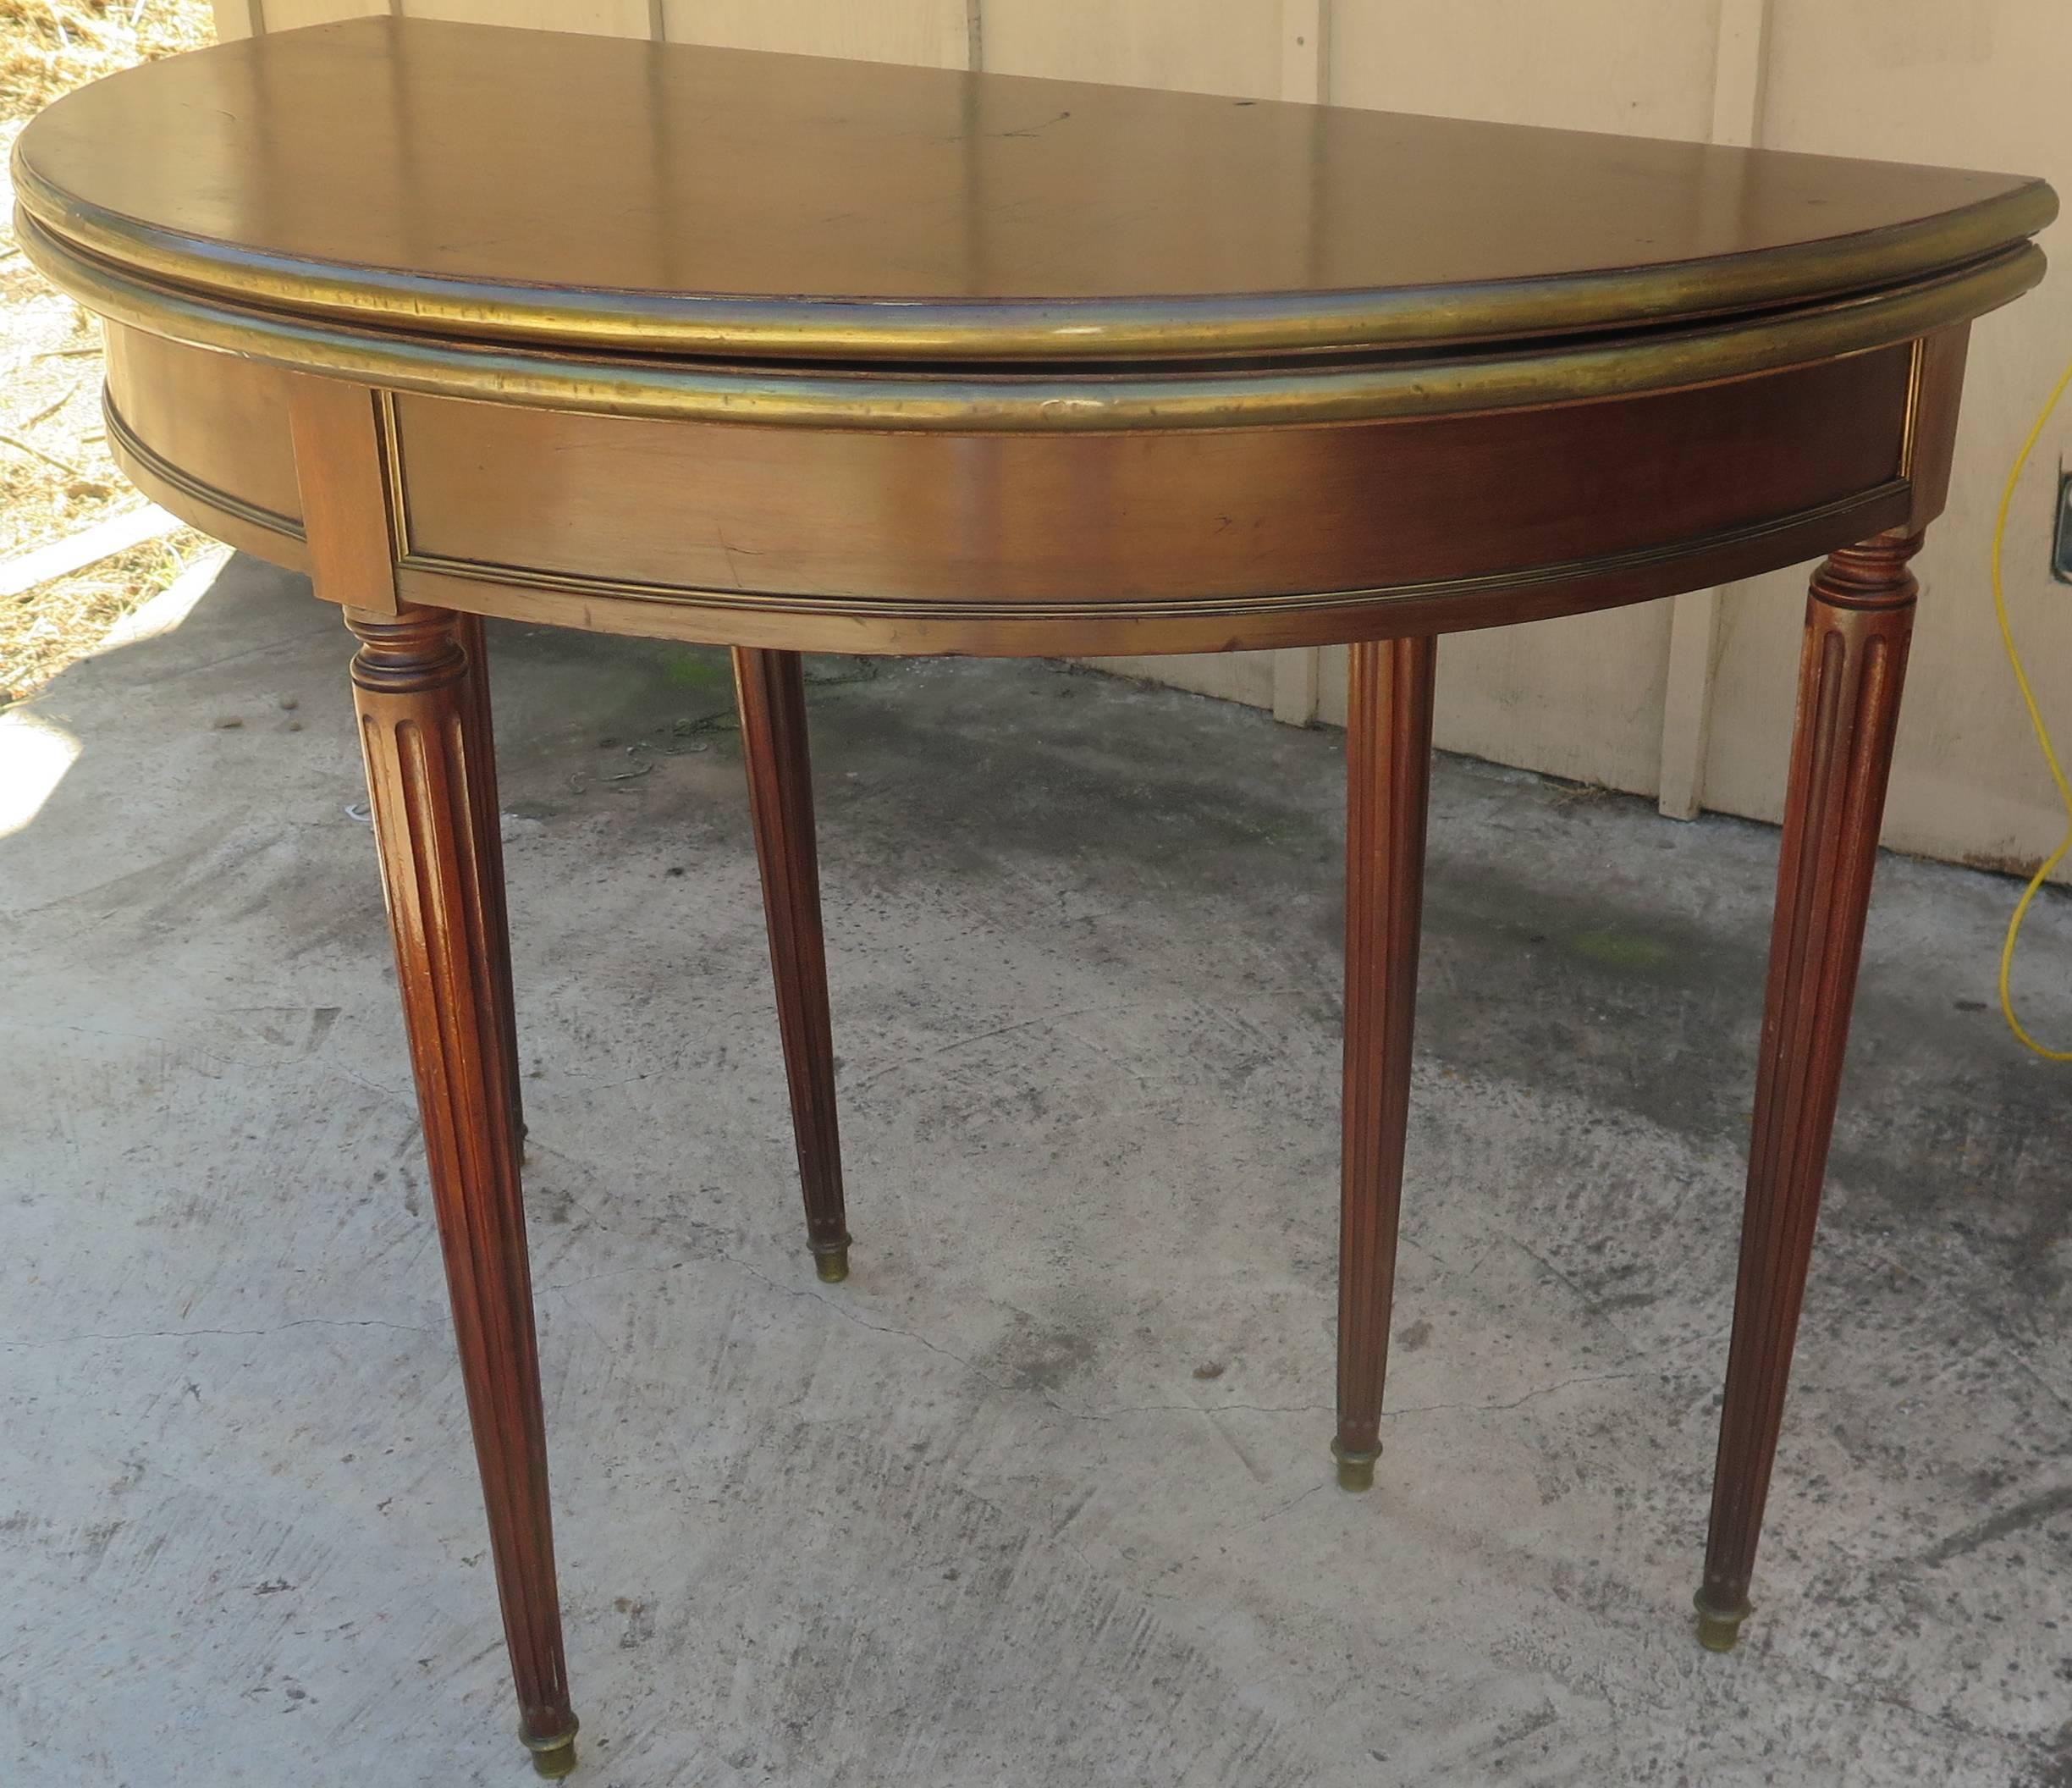 Beautiful French demilune with bronze trim, converts to round game table. Manner of Jansen.